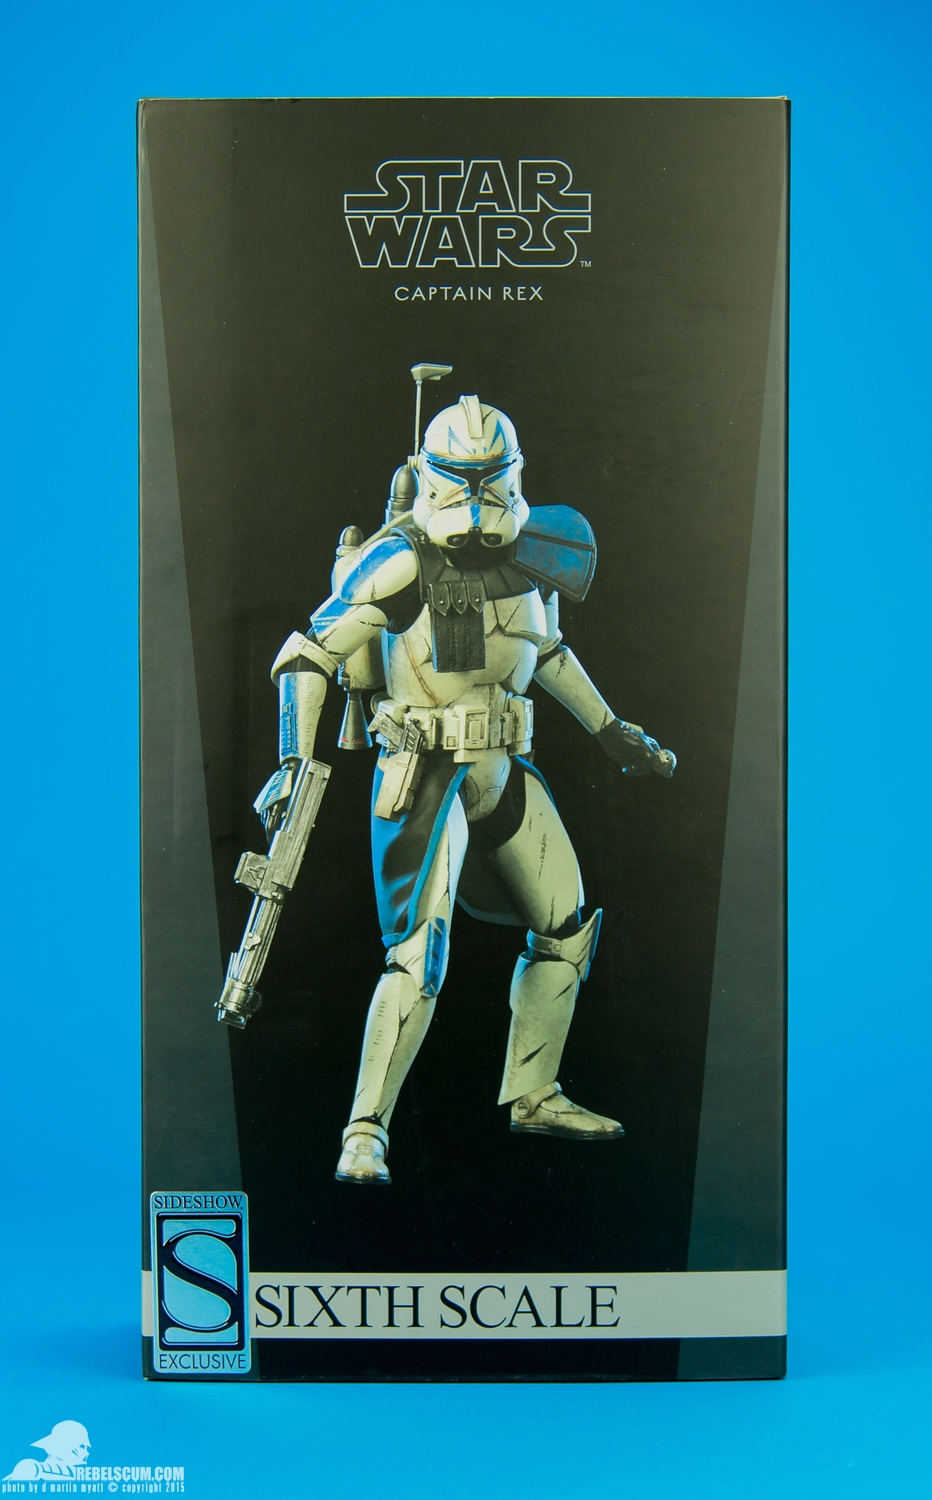 Captain-Rex-Phase-II-Sixth-Scale-Figure-Sideshow-Collectibles-023.jpg